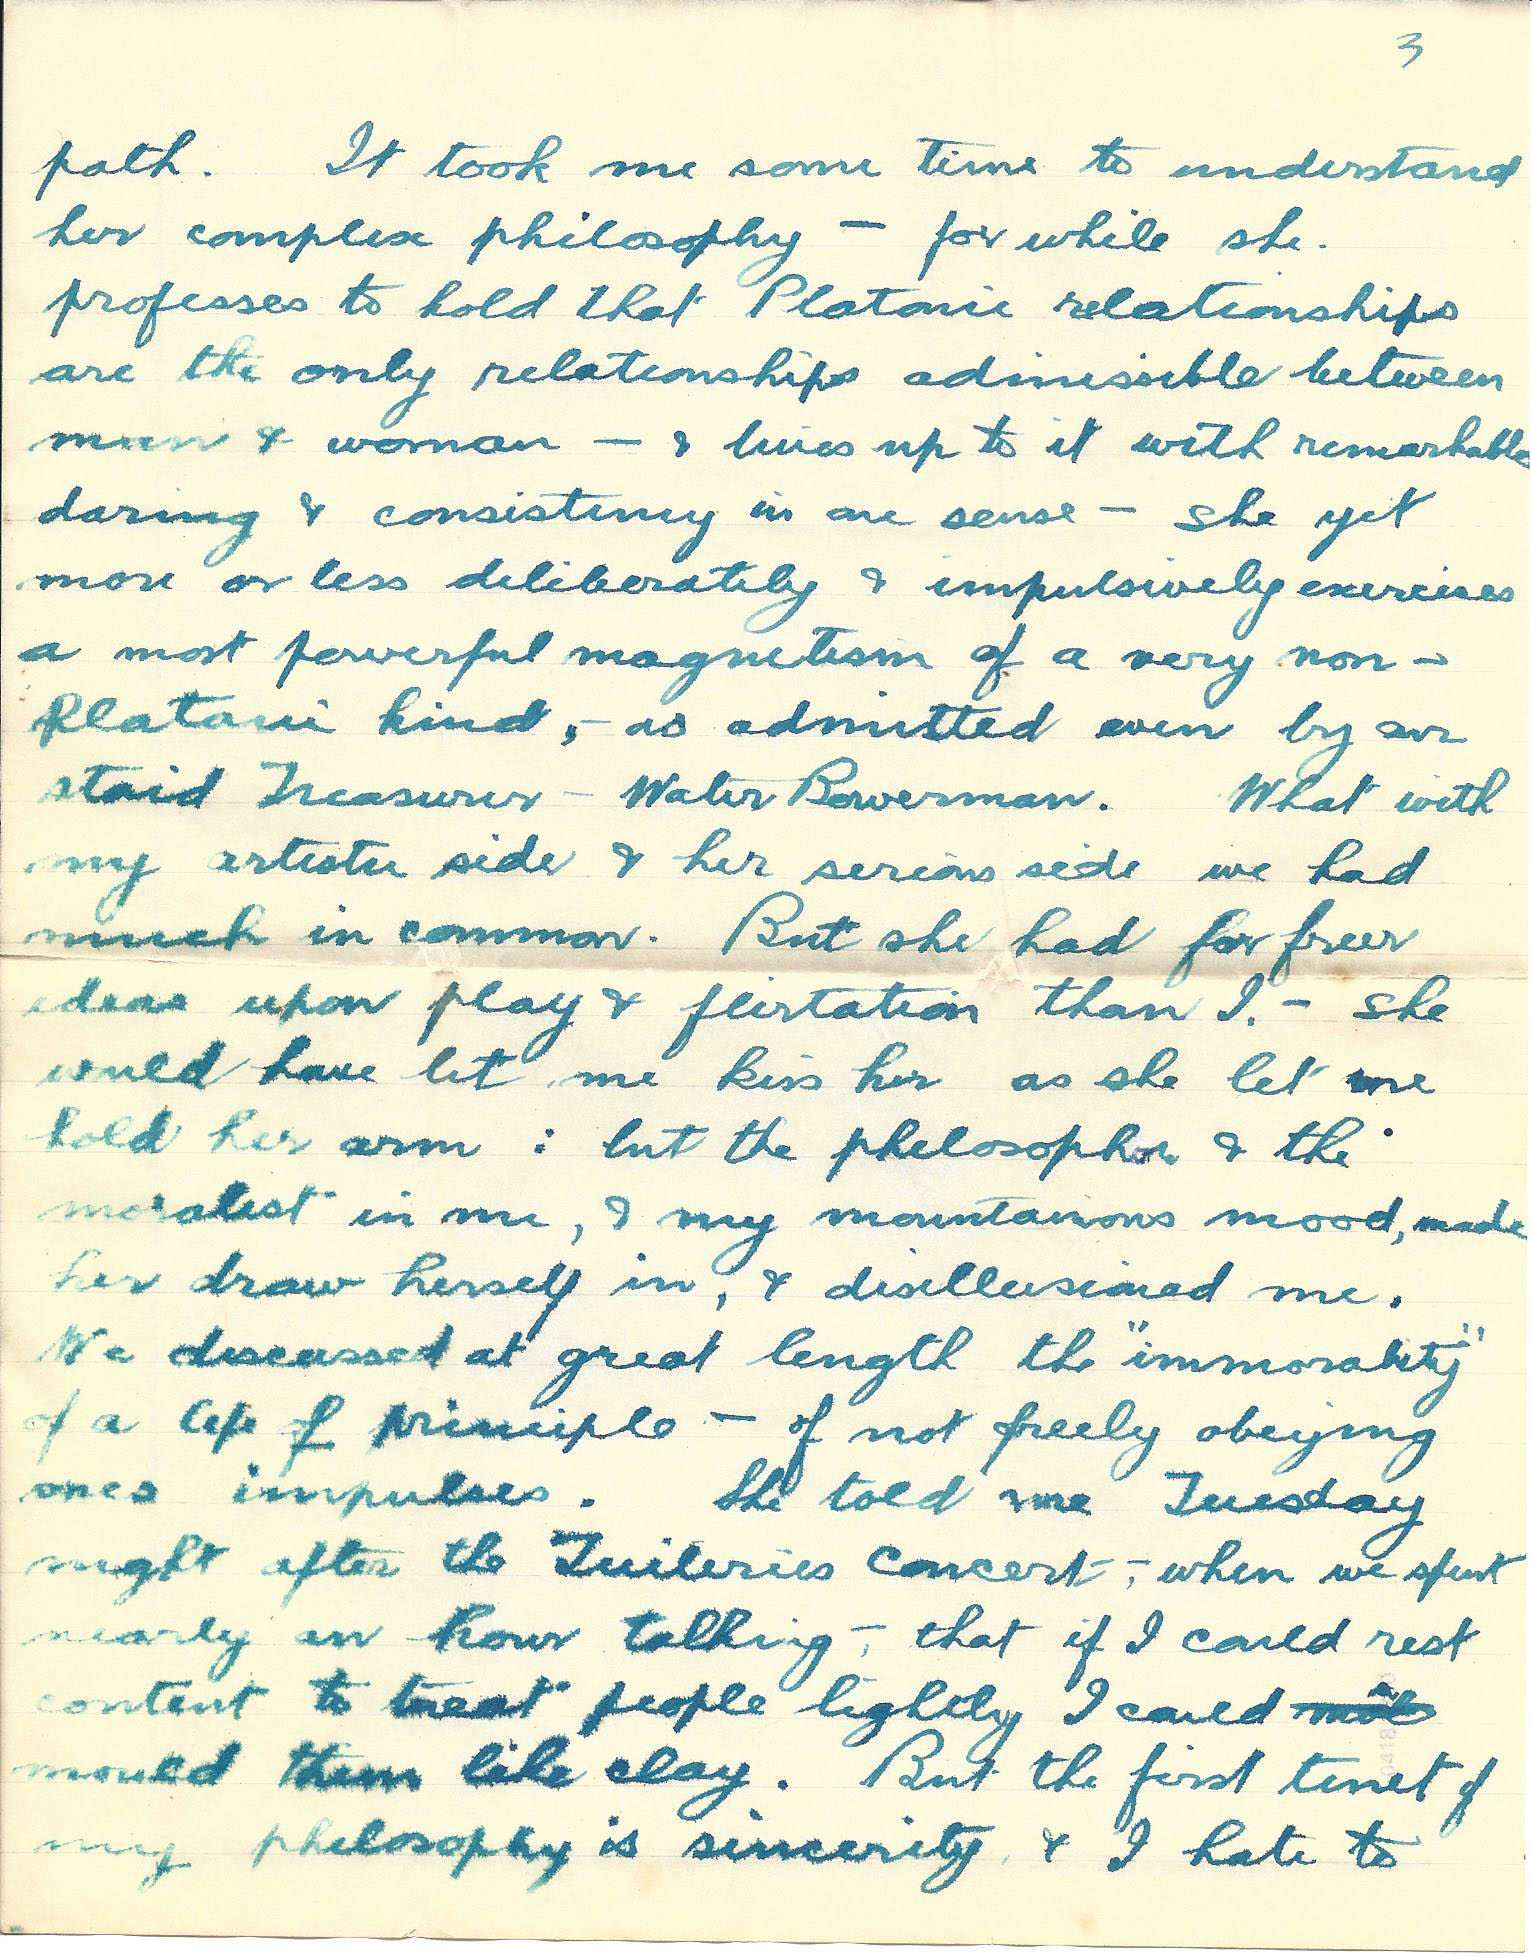 1919-09-08 p3 Donald Bearman letter to his mother